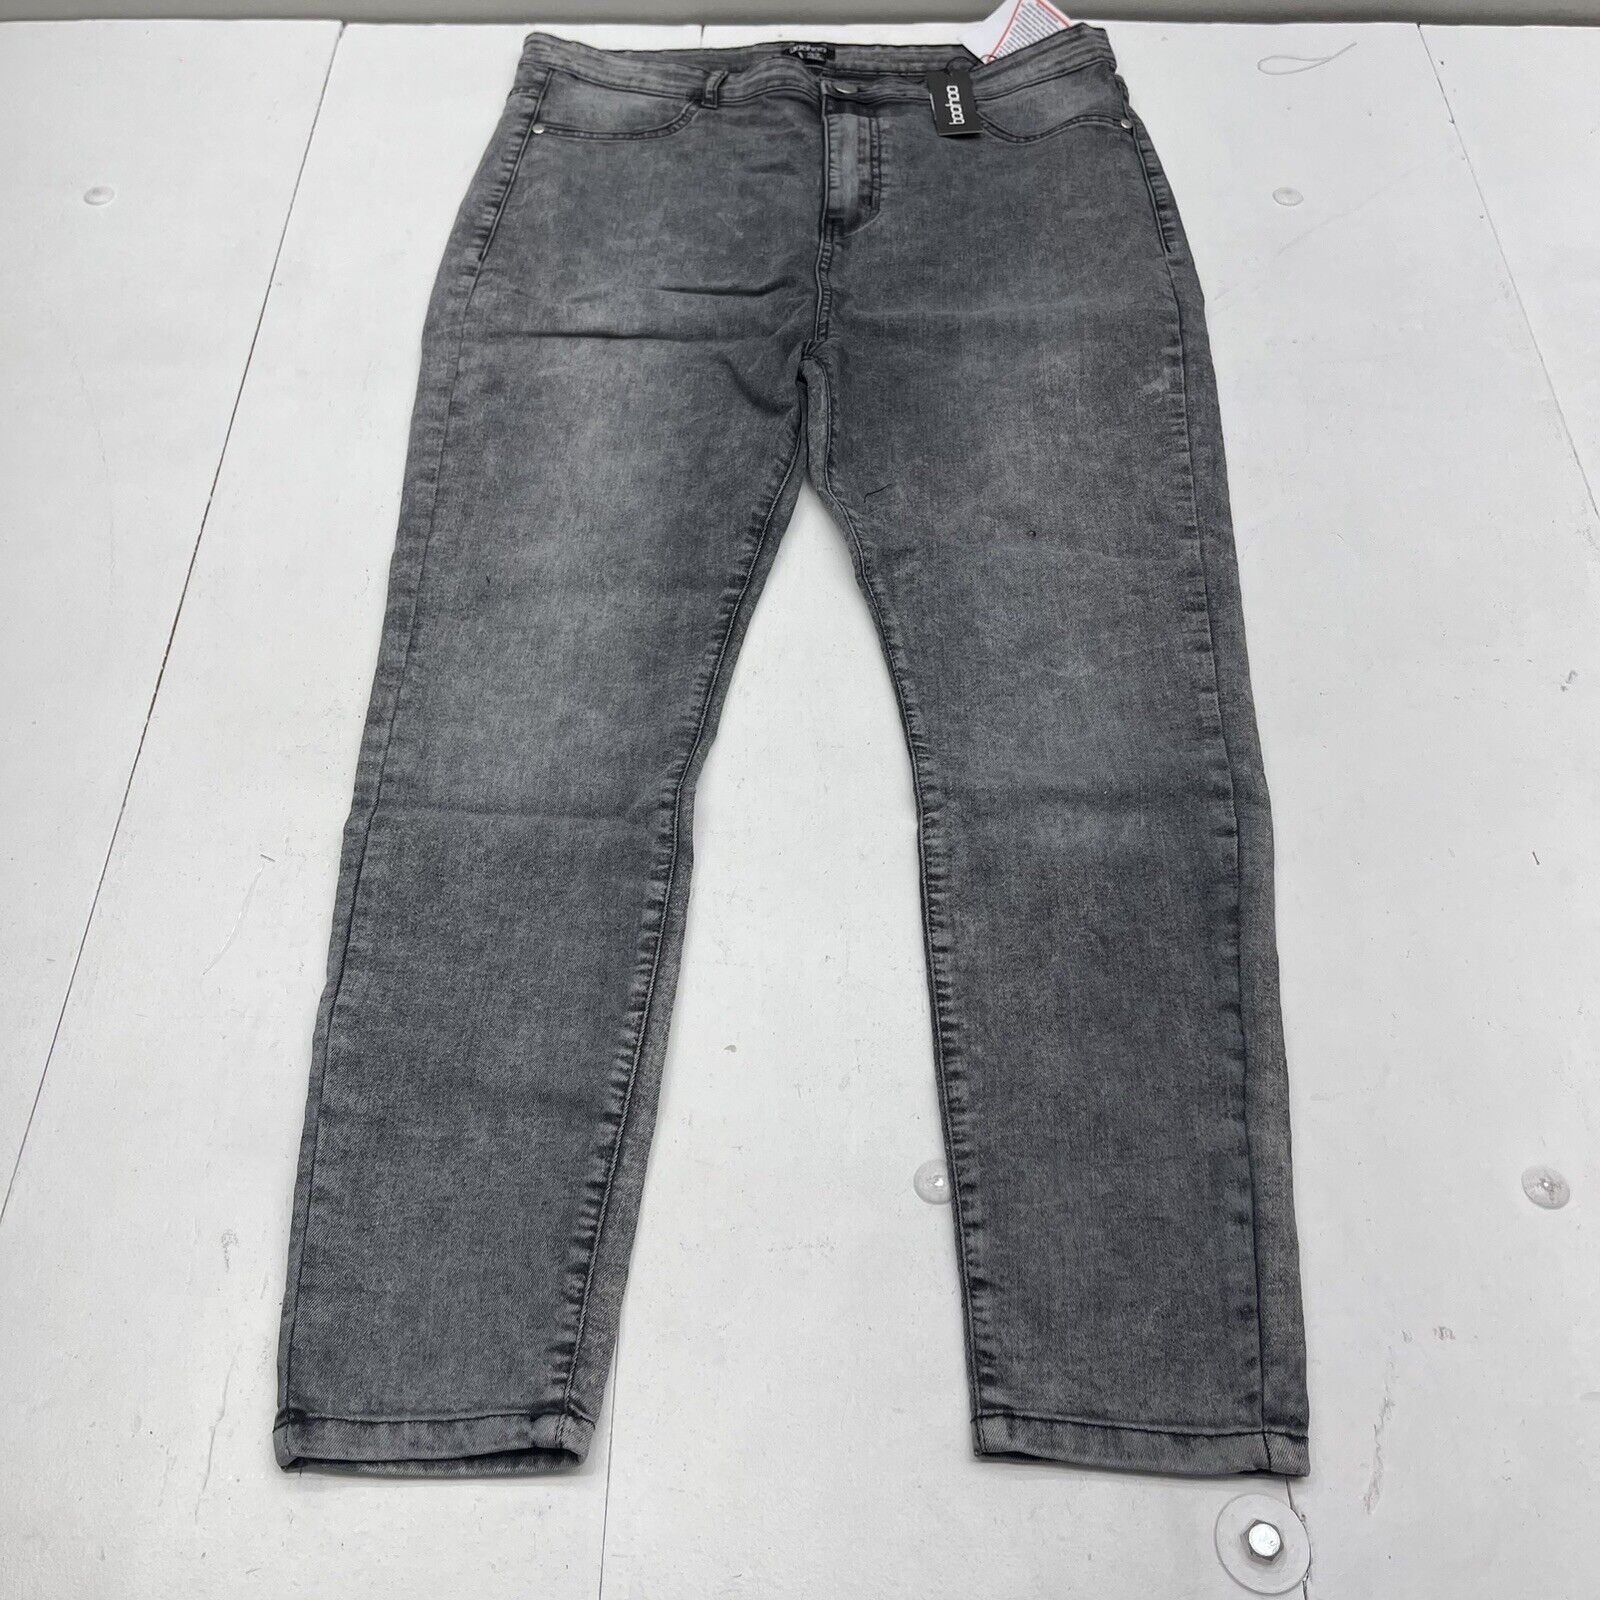 Marlin Blue Stone Wash Whisker Stretch Jeans : Made To Measure Custom Jeans  For Men & Women, MakeYourOwnJeans®